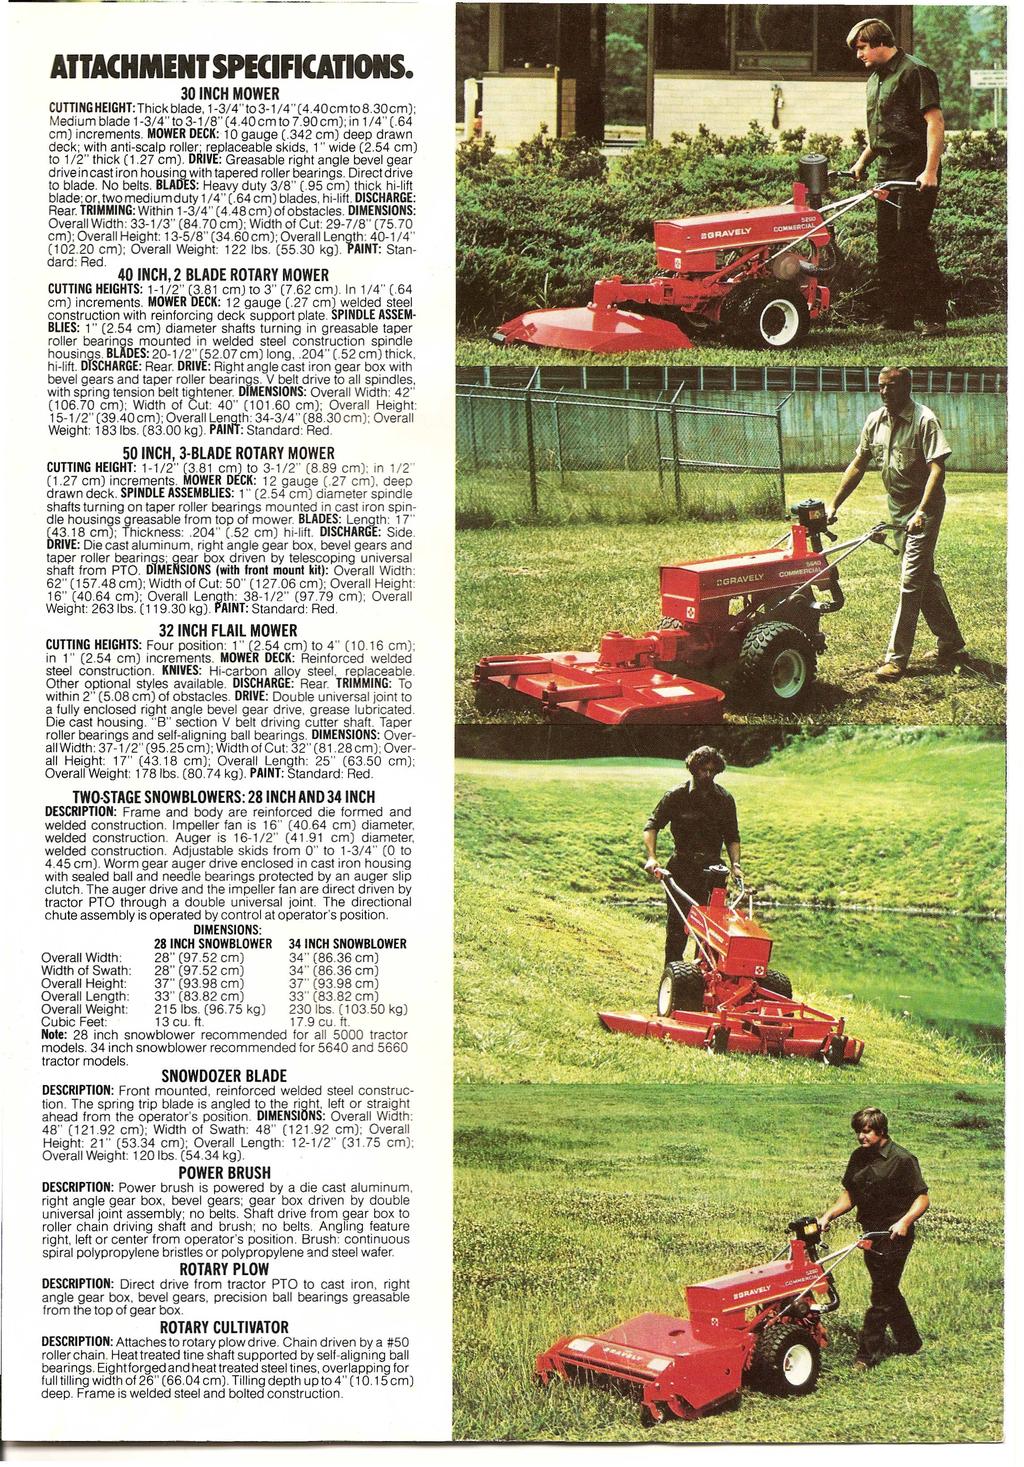 A'TACHMENTSPECIFICATIONS. 30 INCH MOWER CUTTING HEIGHT: Thick blade, 1-3/4"to 3-1 /4" (4.40cm t08.30cm); Medium blade 1-3/4"t03-1/8"(4.40cmto 7.90cm); in 1/4" (.64 cm) increments.